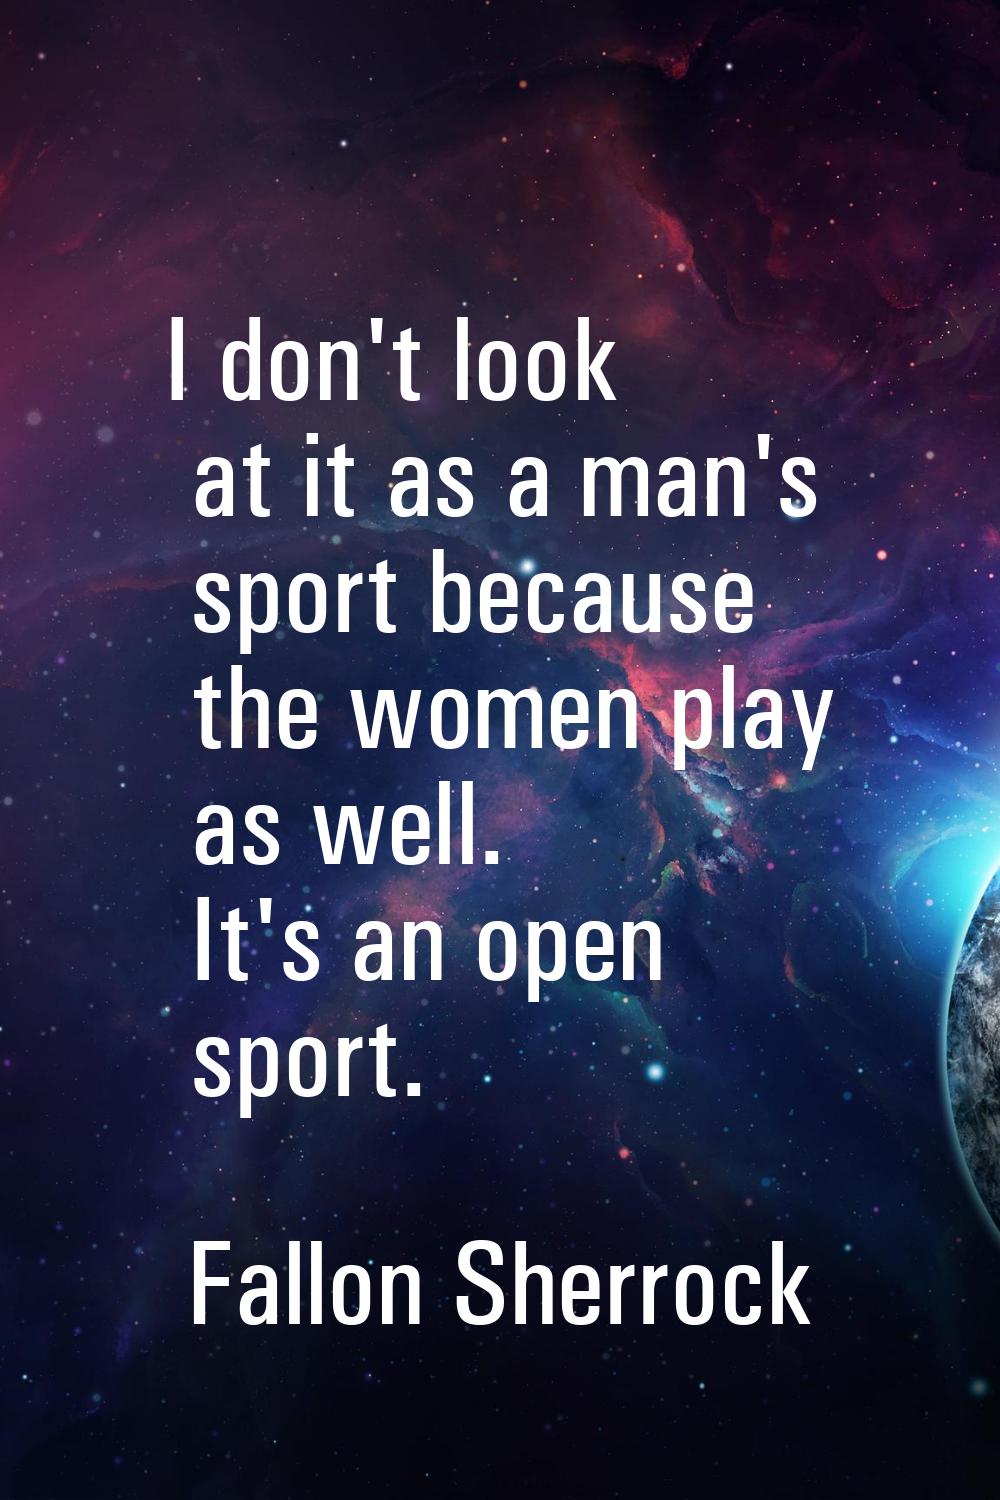 I don't look at it as a man's sport because the women play as well. It's an open sport.